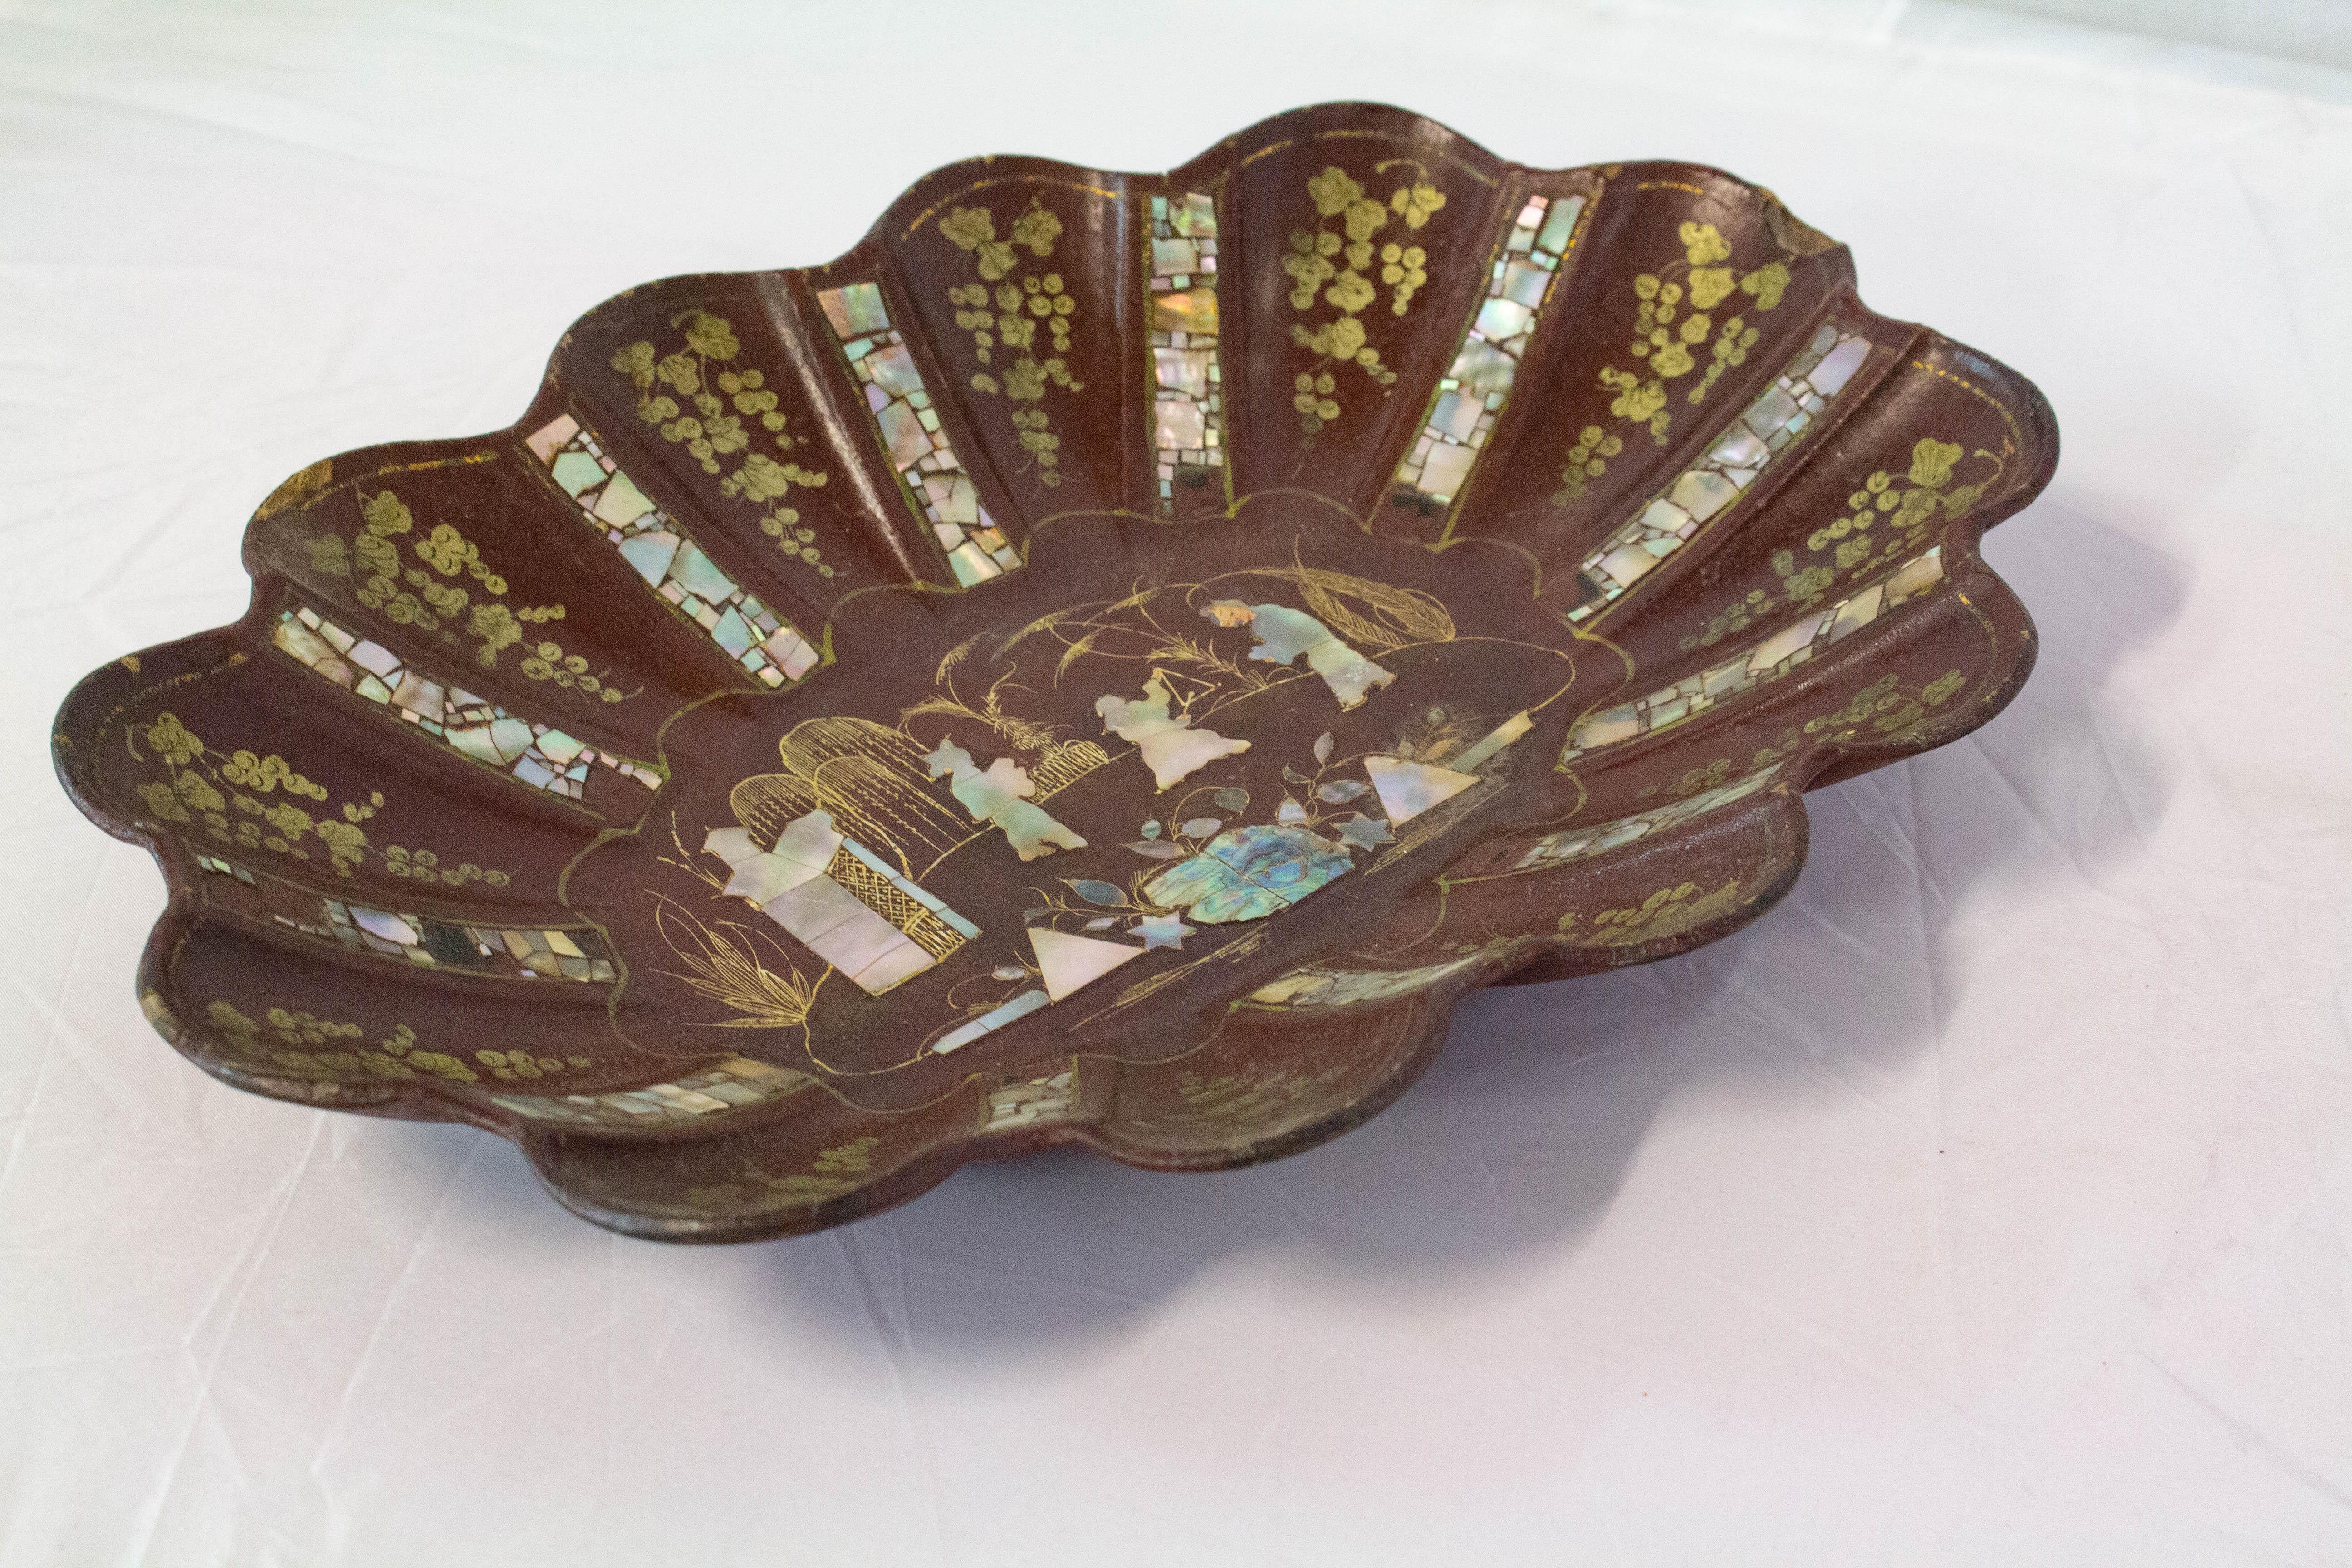 Chinese oval decorative center piece papier mâché inlaid late 19th century fruit bowl or bread basket.
Classic chinoiserie scene of the period Napoleon III.
Can also be used as mural decoration.
Please see Chinoiserie Oval Tray Wood Inlaid